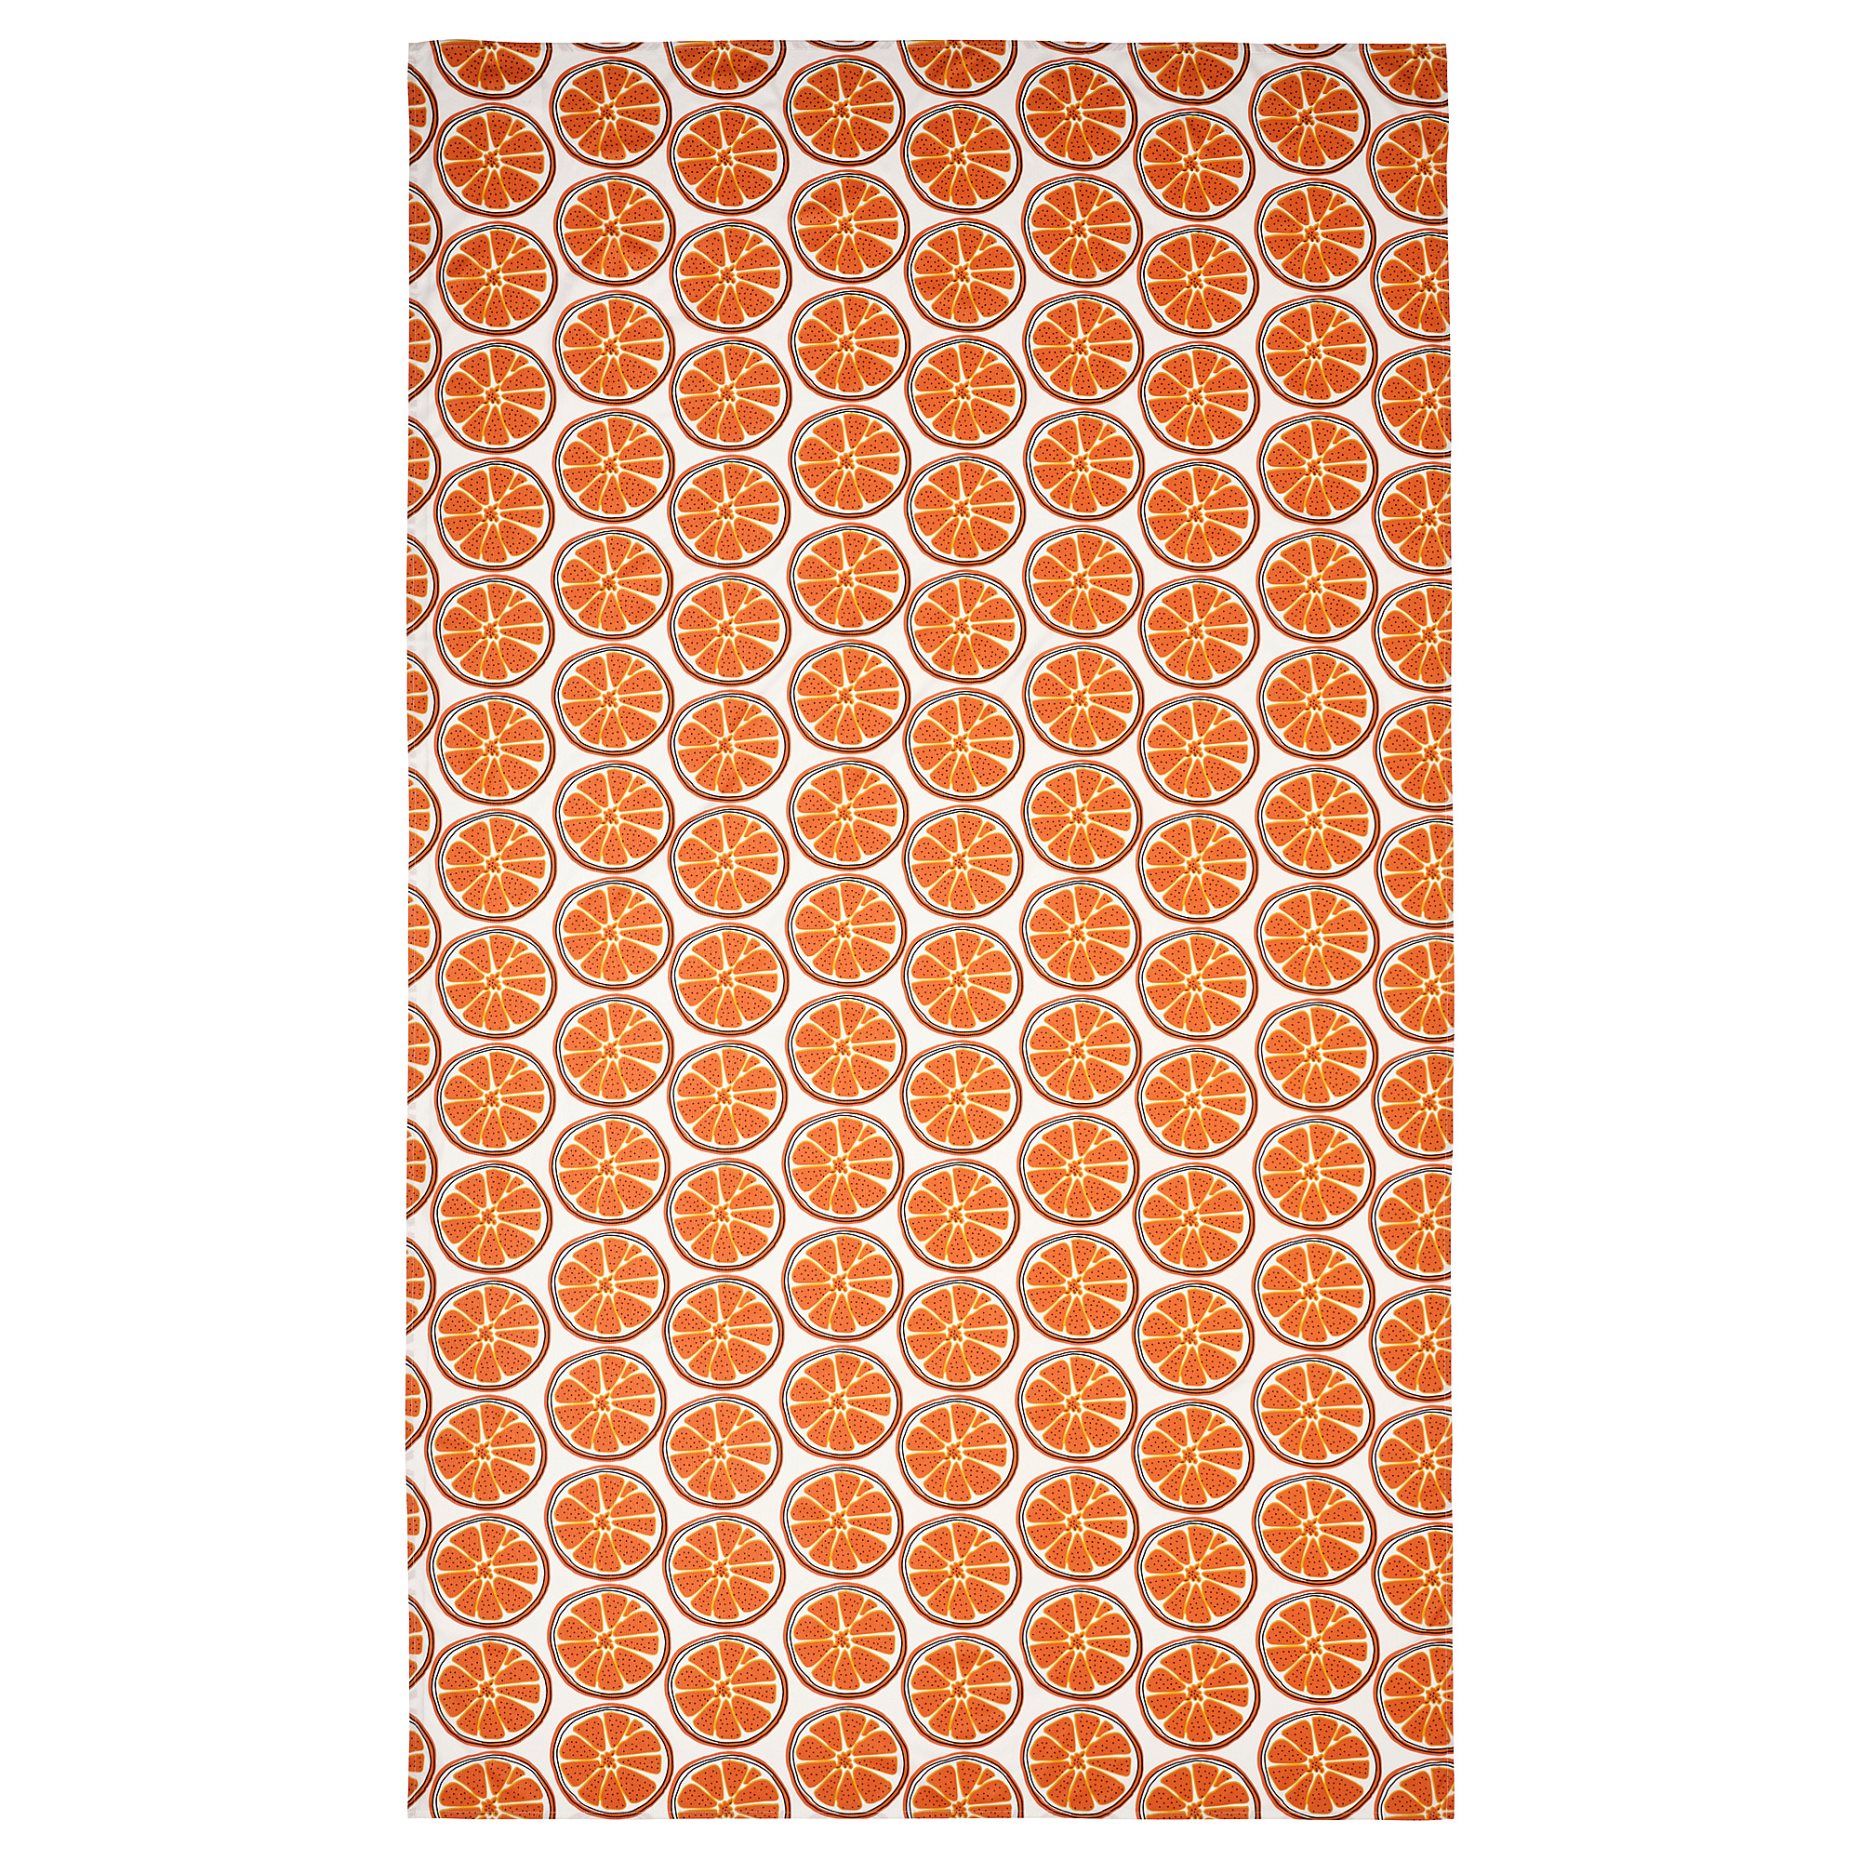 TORVFLY, tablecloth patterned, 145x240 cm, 405.571.86